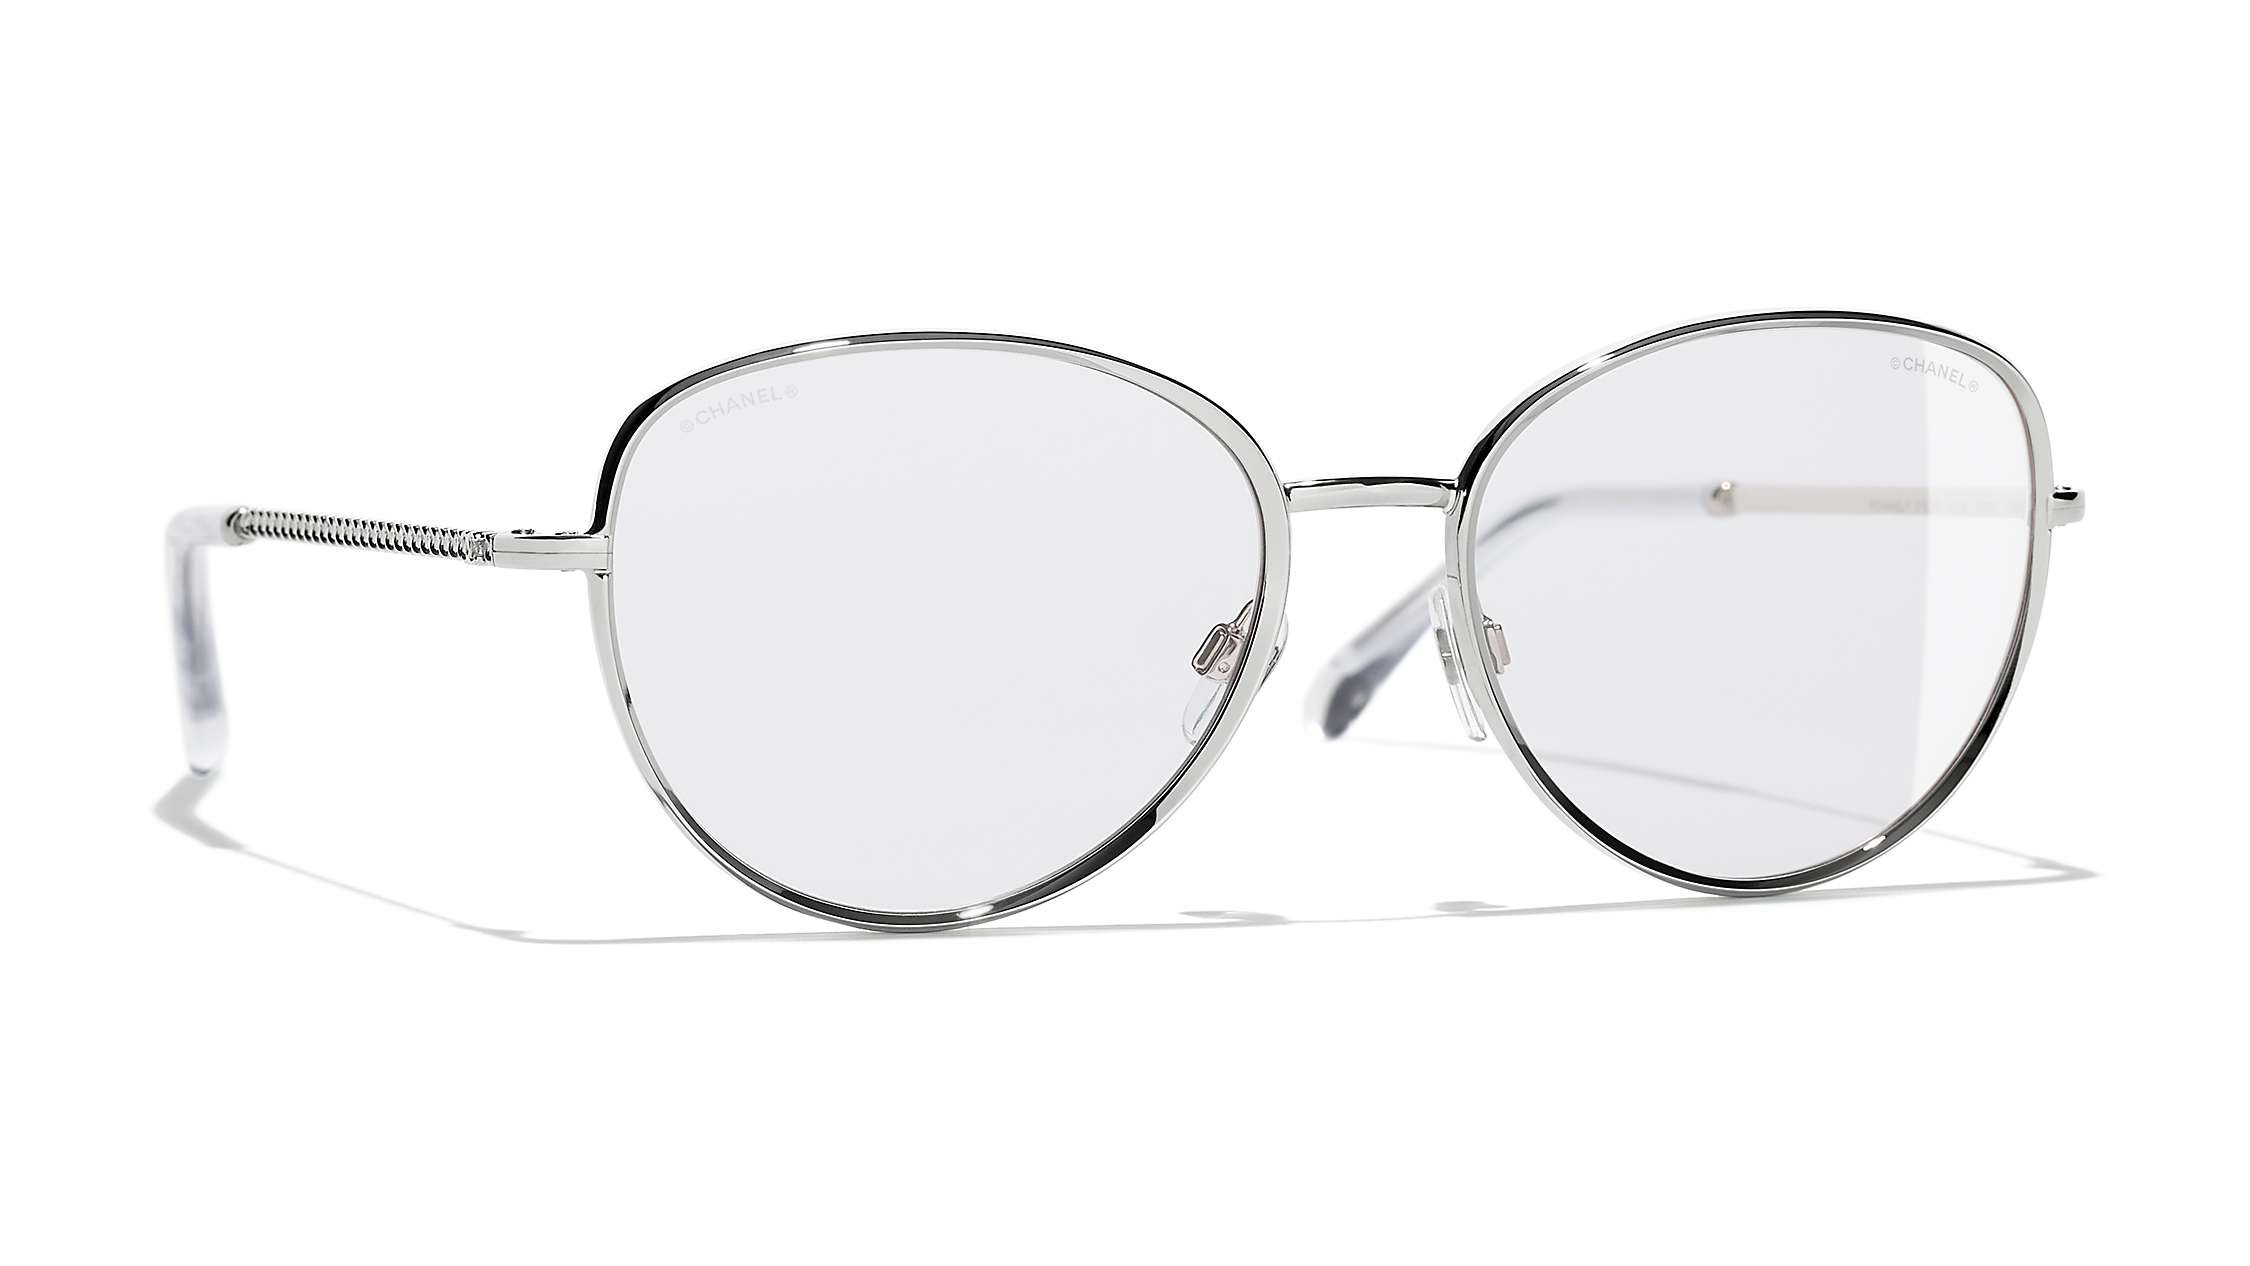 Buy CHANEL Pilot Sunglasses CH2182S Silver/Grey Online at johnlewis.com